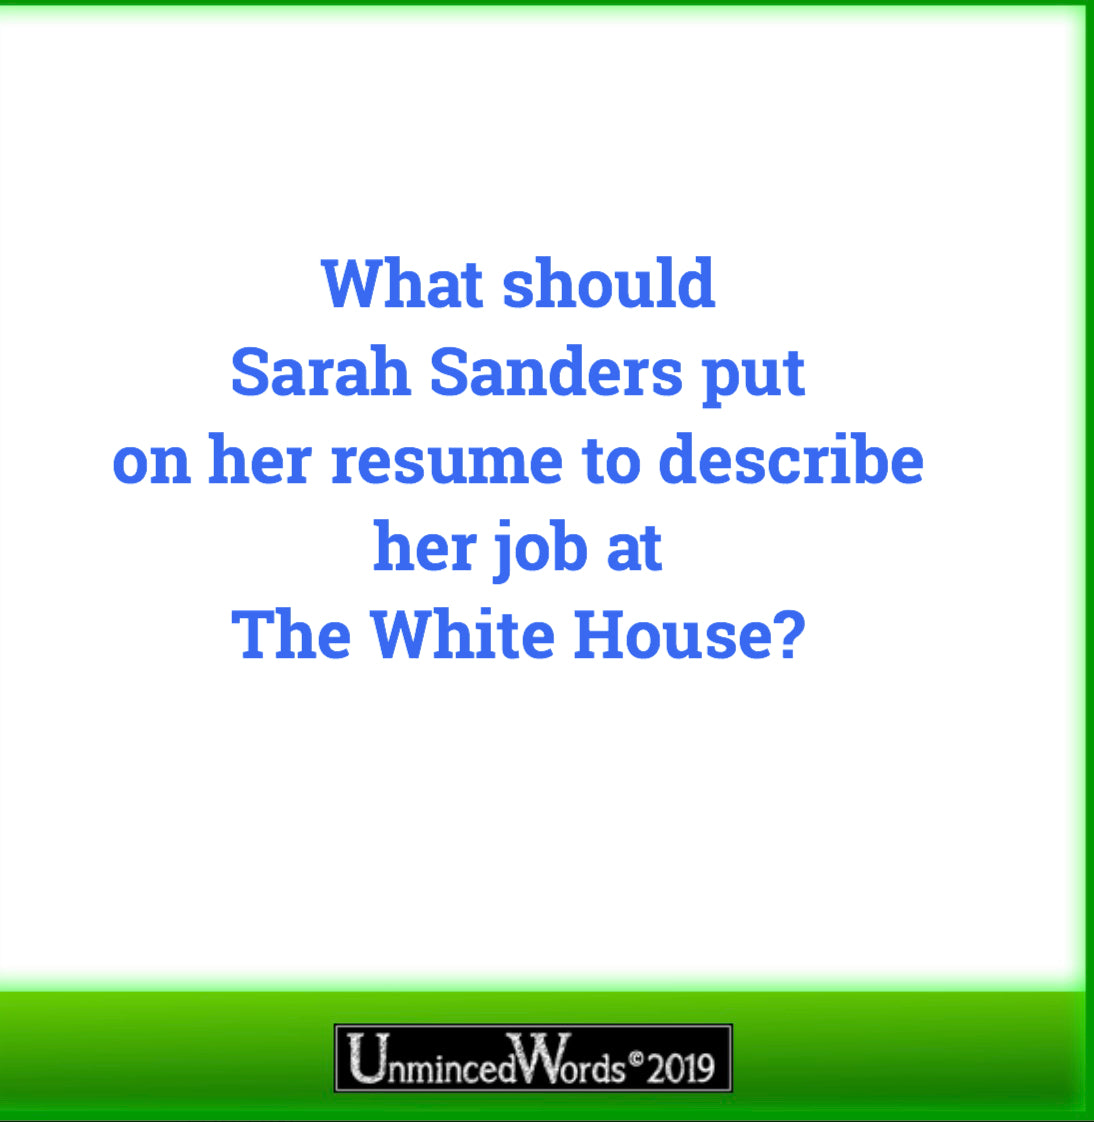 How should Sarah Sanders describe her White House job?